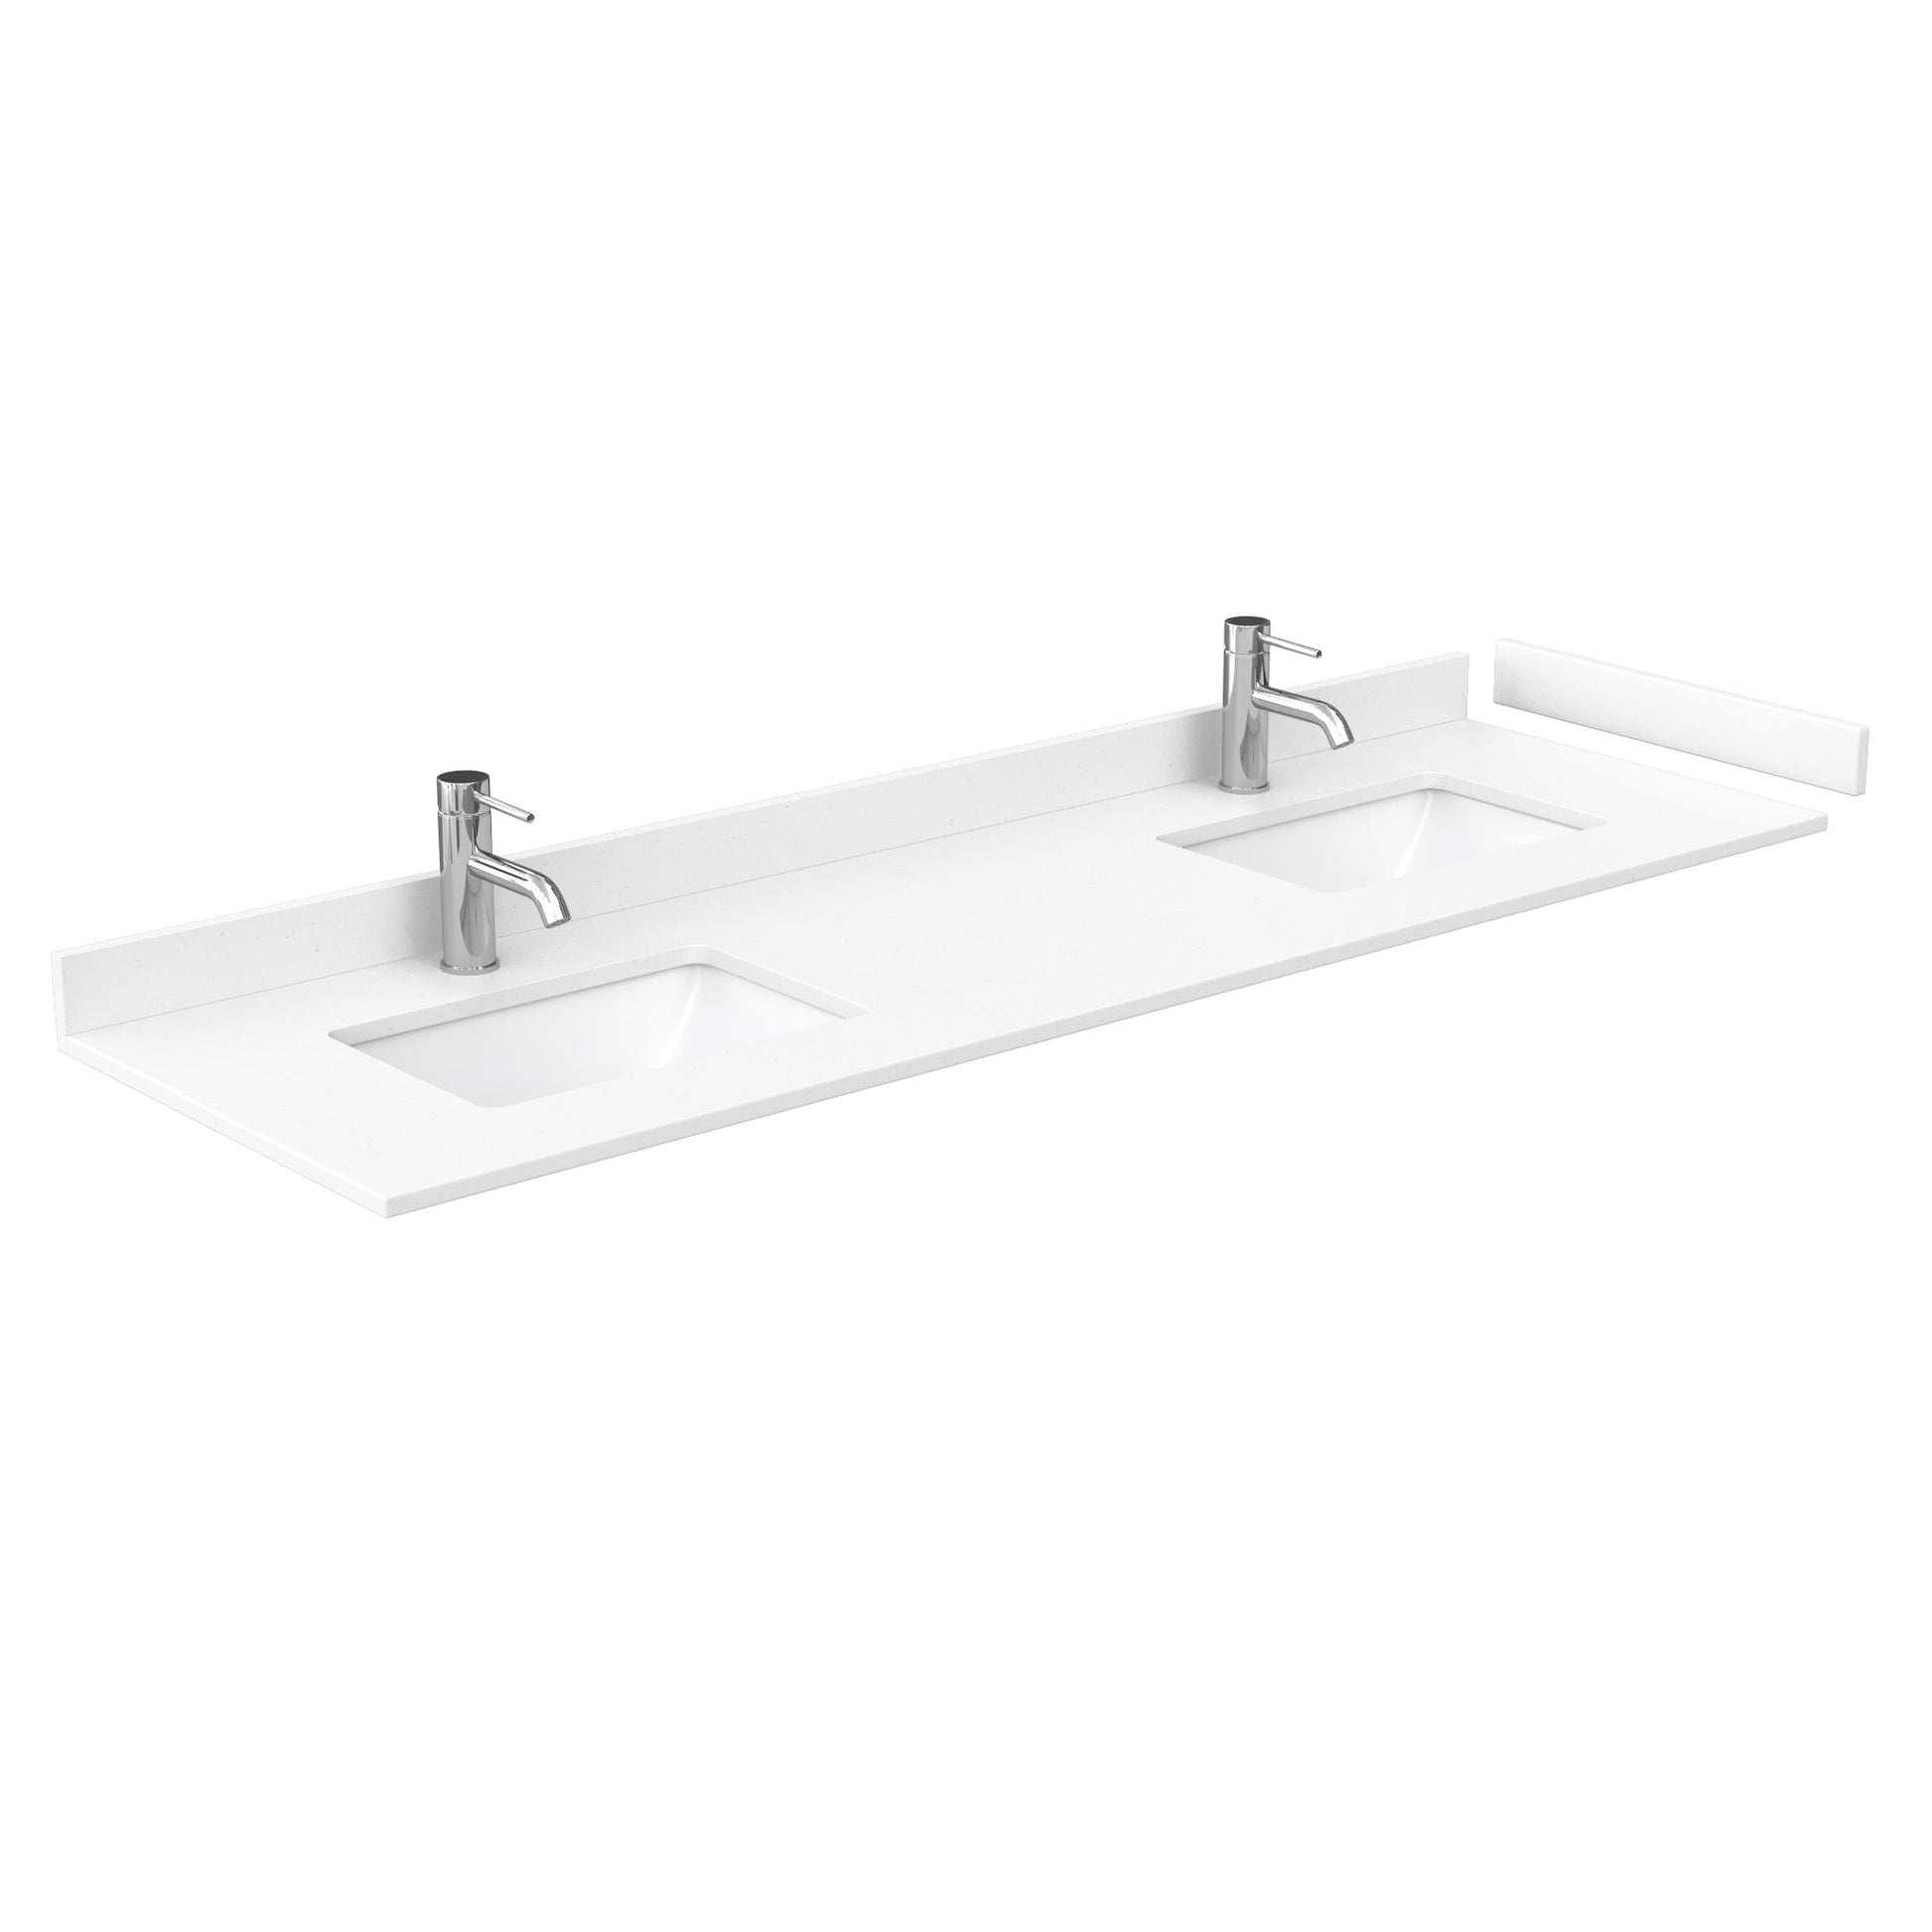 Wyndham Collection Sheffield 72" Double Bathroom Vanity in White, White Cultured Marble Countertop, Undermount Square Sinks, 70" Mirror